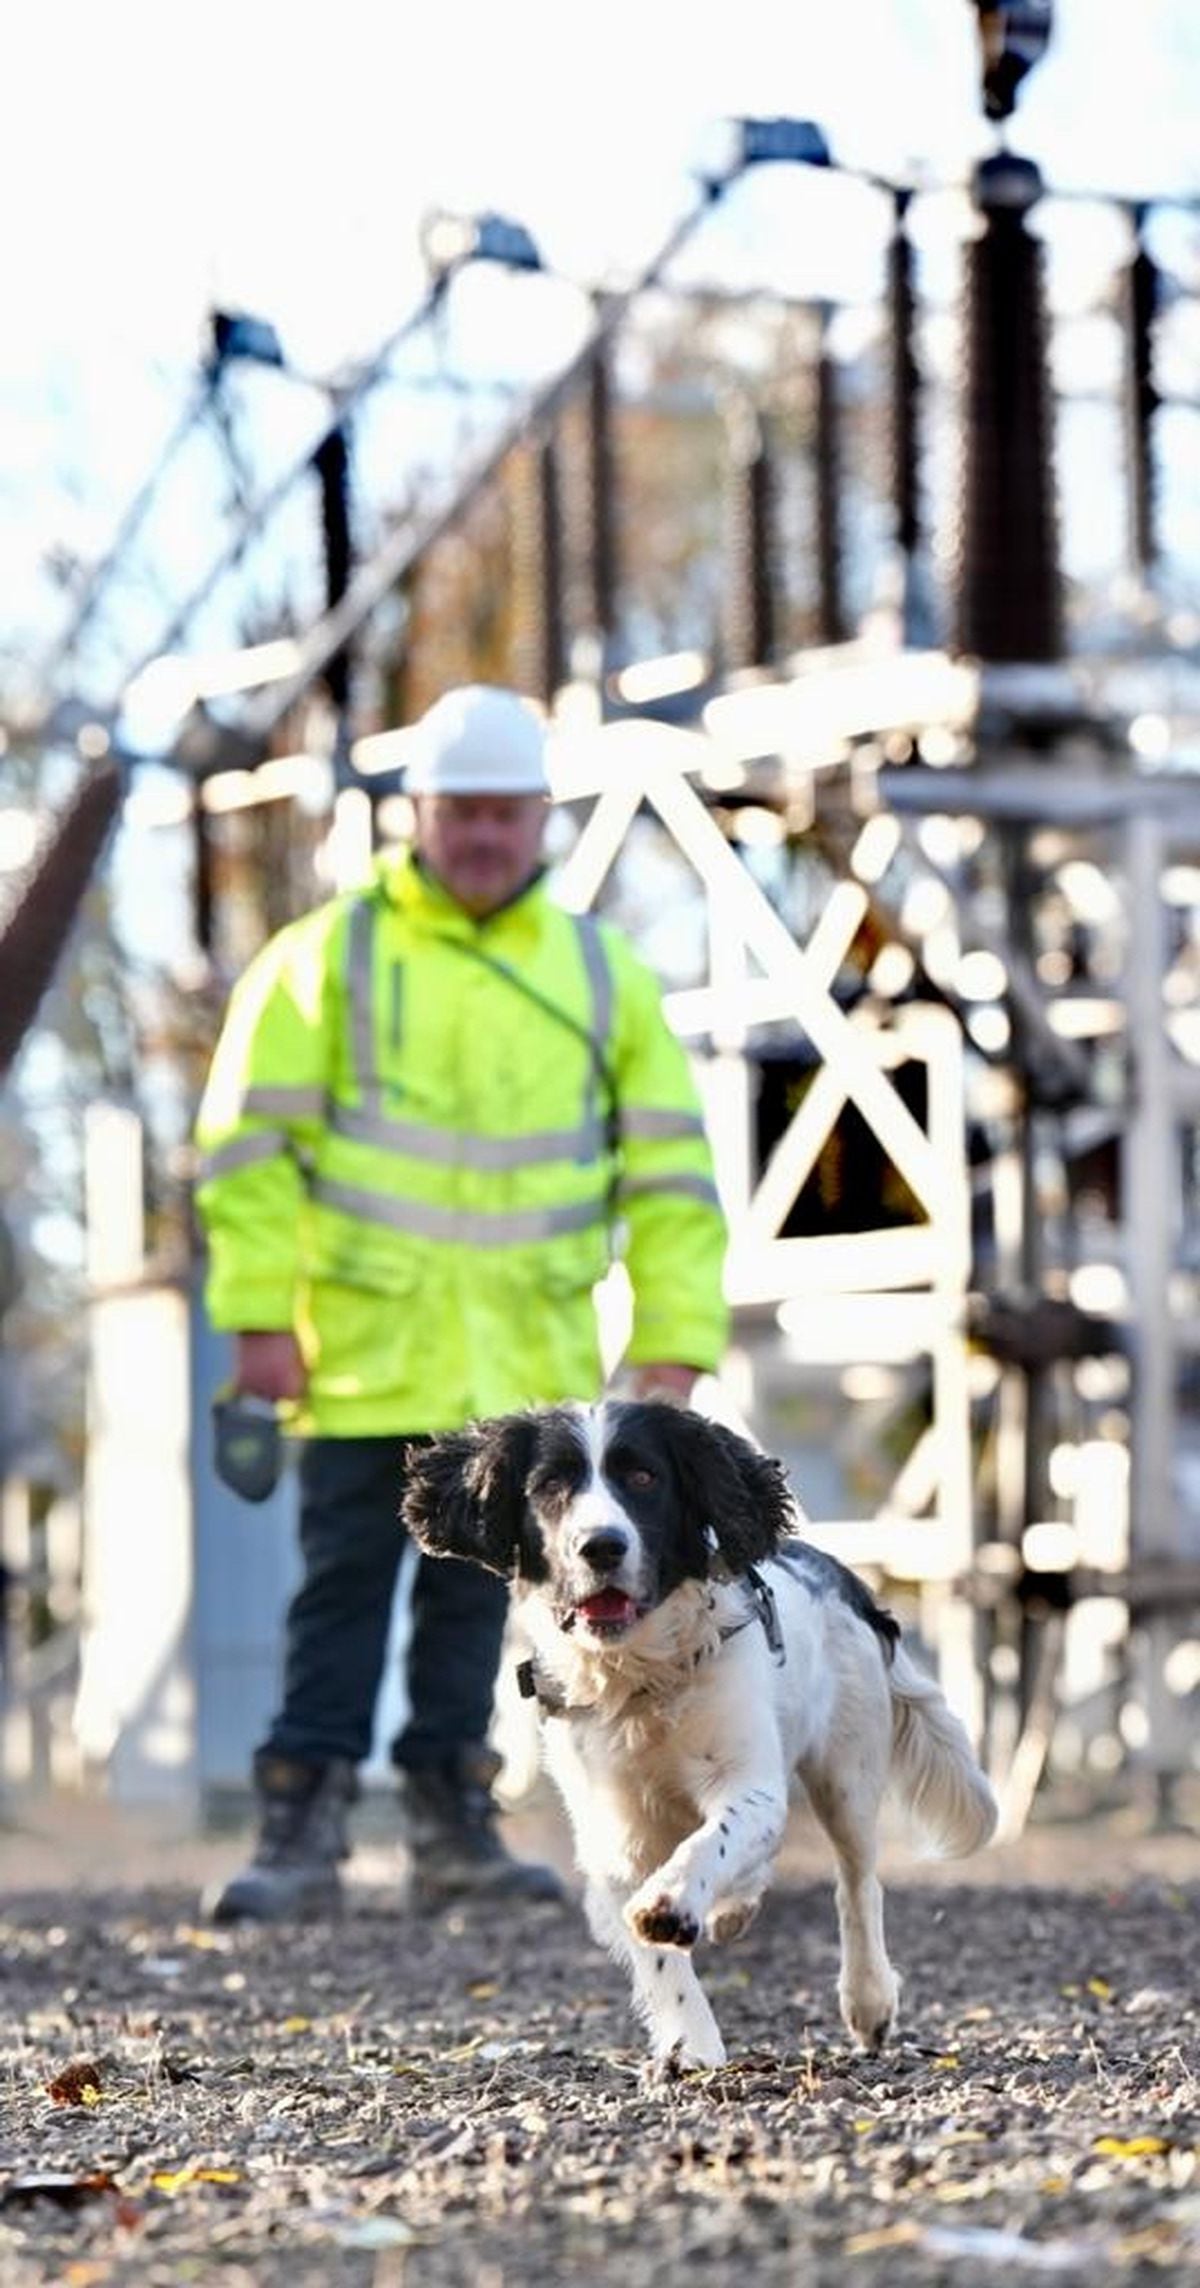 
              
Undated handout photo issued by  Scottish Power Energy Networks  (SPEN) of Springer Spaniel, Jac, who helps sniffs out faults on the power network, at Braehead electricity substation in Renfrew. SPEN has been trialling the use of specially trained detection dog Jac, who is able to help identify faults on the power network deep underground. Issue date: Tuesday November 22, 2022. PA Photo. See PA story ENERGY Dog. Photo credit should read: Scottish Power Energy Networks /PA Wire NOTE TO EDITORS: This handout photo may only be used in for editorial reporting purposes for the contemporaneous illustration of events, things or the people in the image or facts mentioned in the caption. Reuse of the picture may require further permission from the copyright holder.
            
